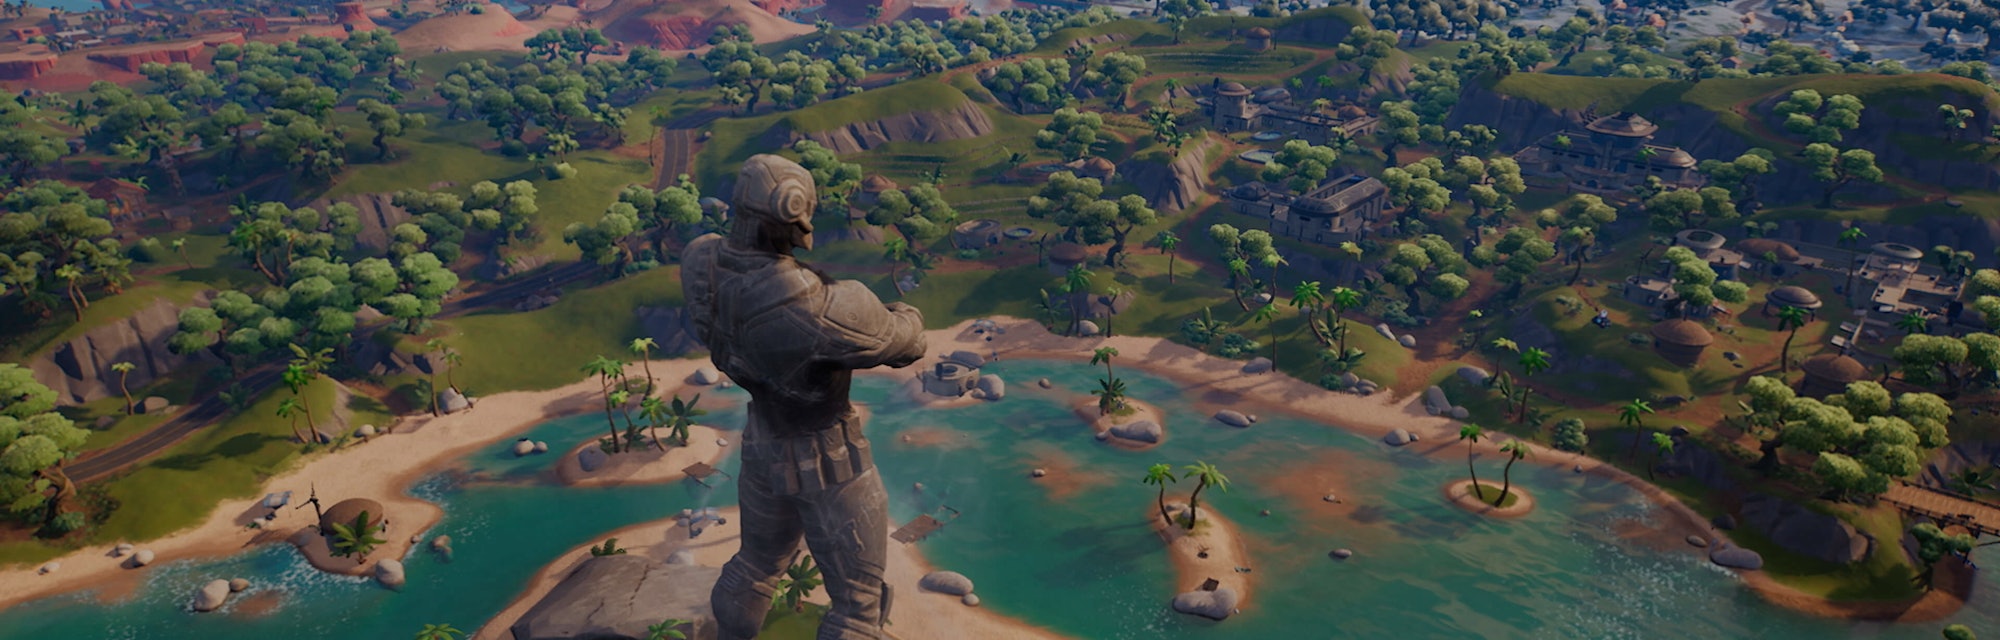 Screenshot of Fortnite Chapter 3 map, showing forests, desert and a tall stone statue of a futuristi...